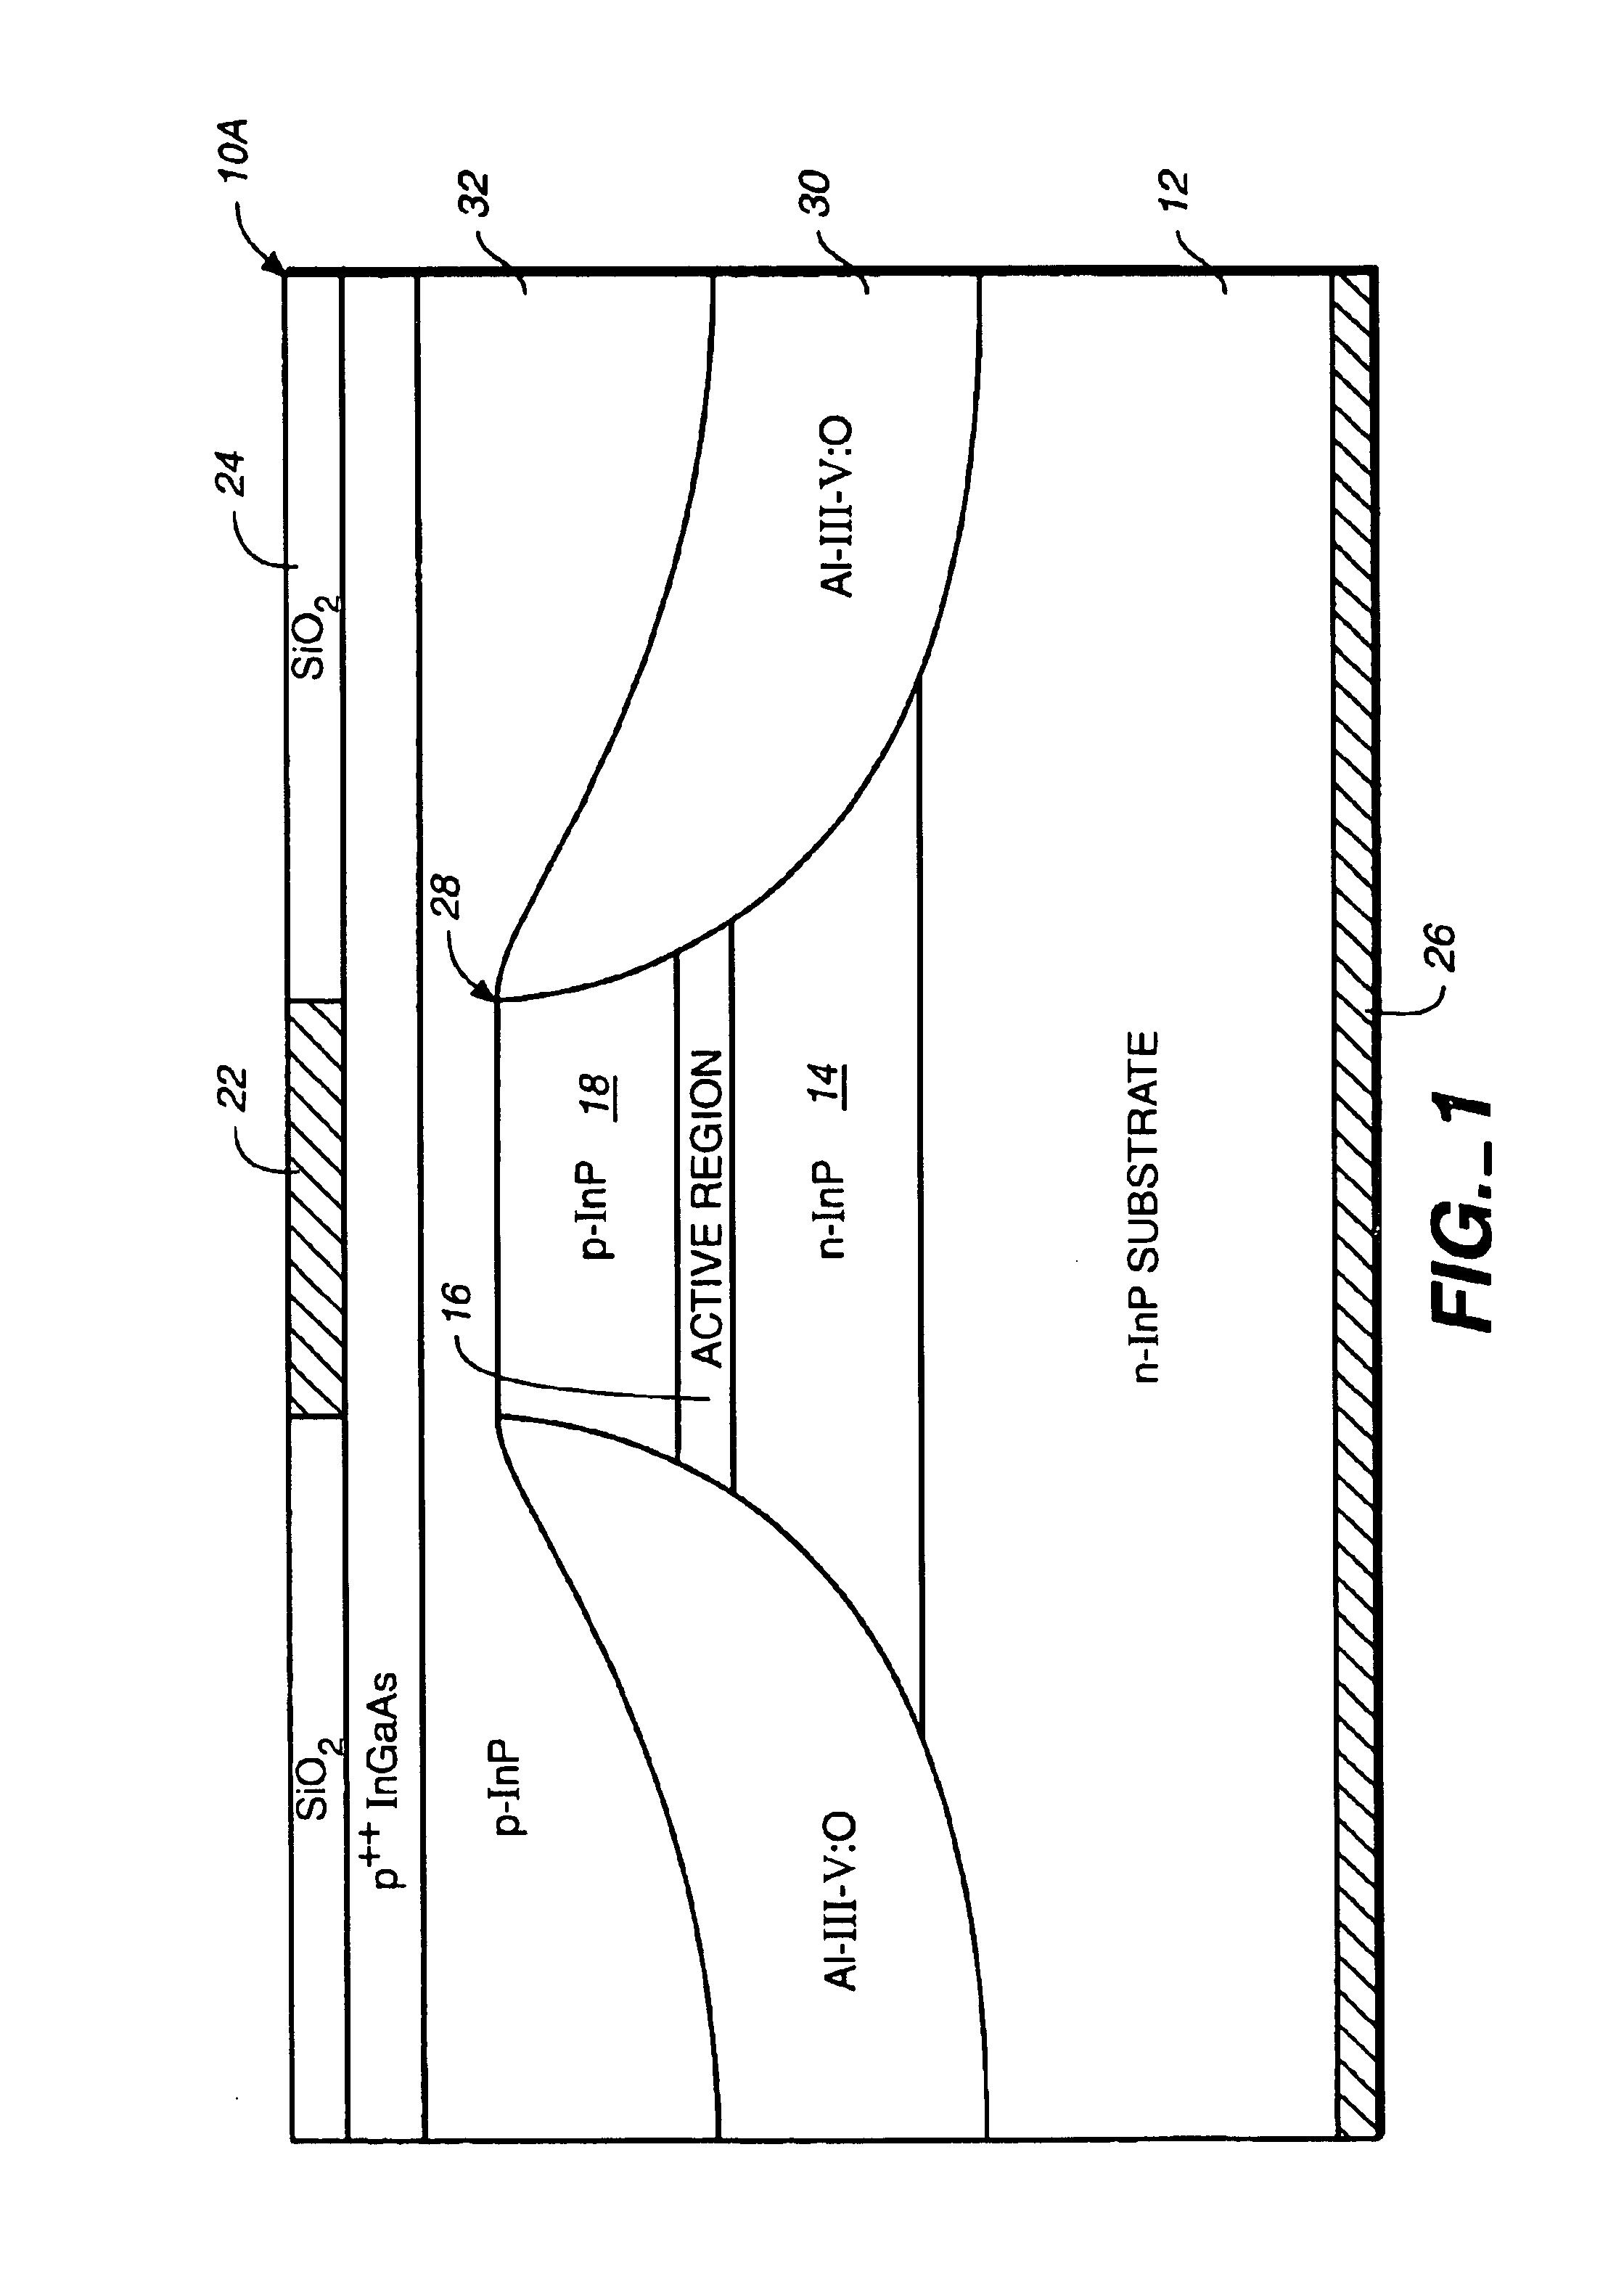 Oxygen-doped Al-containing current blocking layers in active semiconductor devices